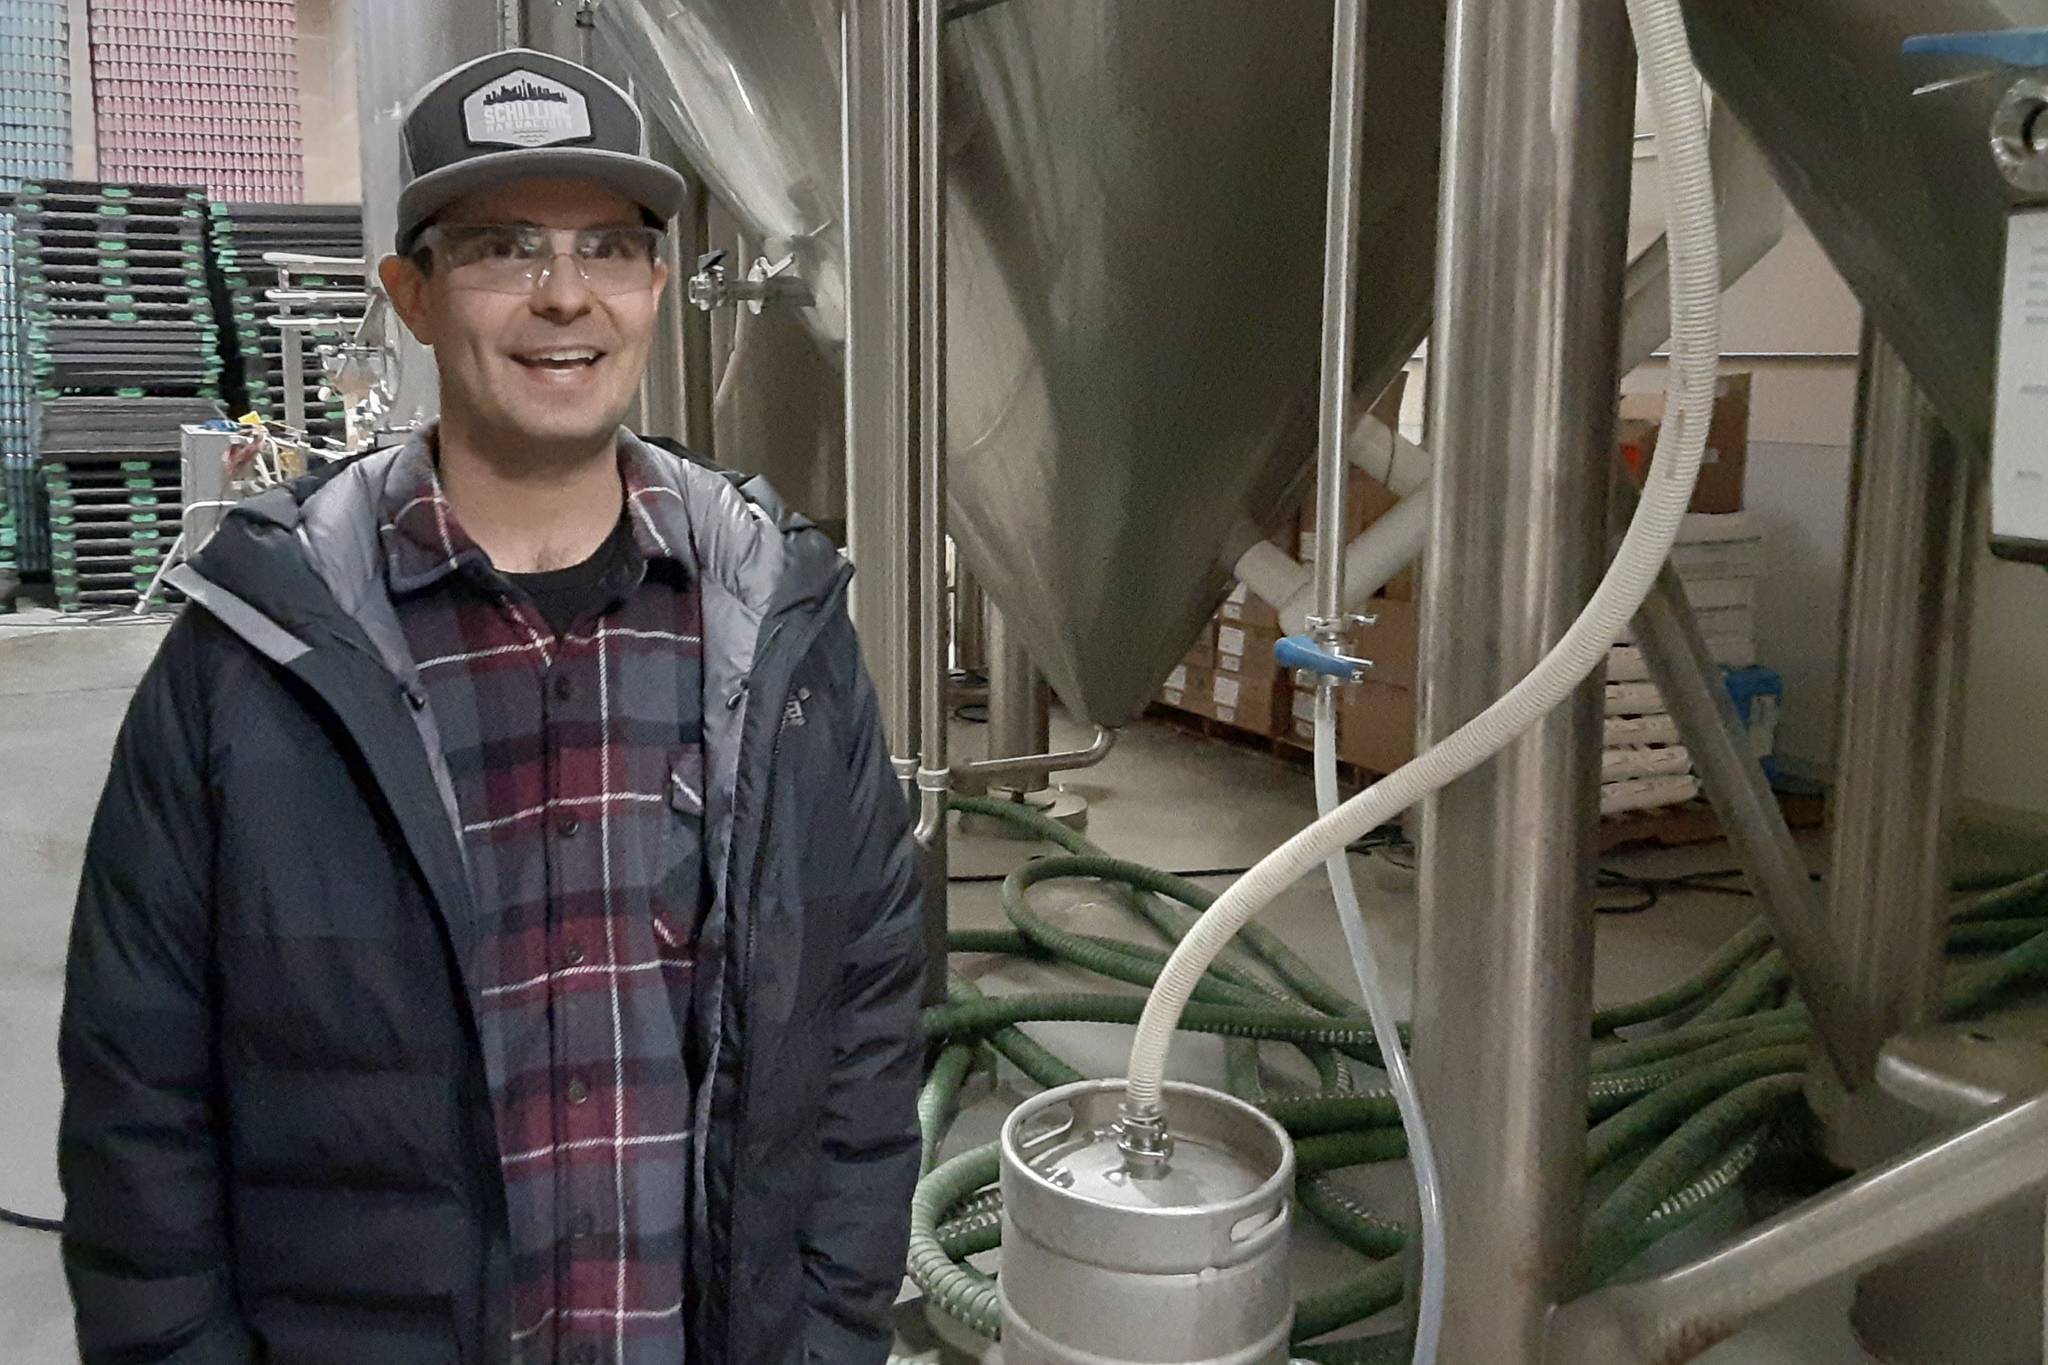 Big changes brewing at Schilling Hard Ciders